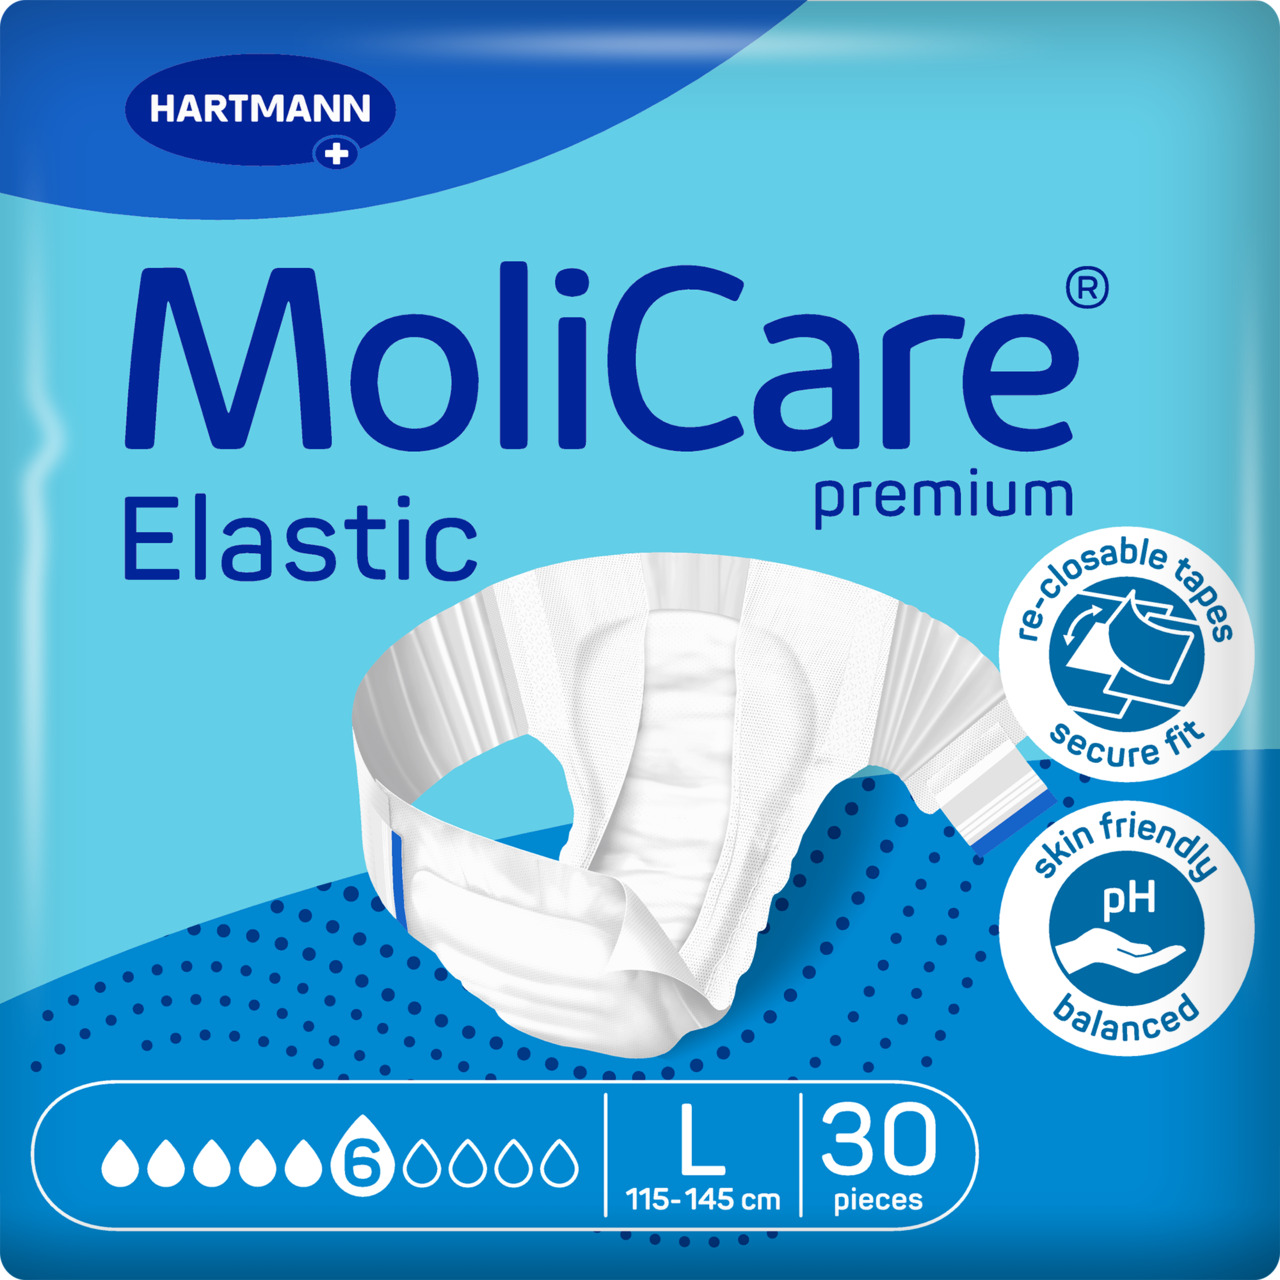 Moderate Incontinence Pads